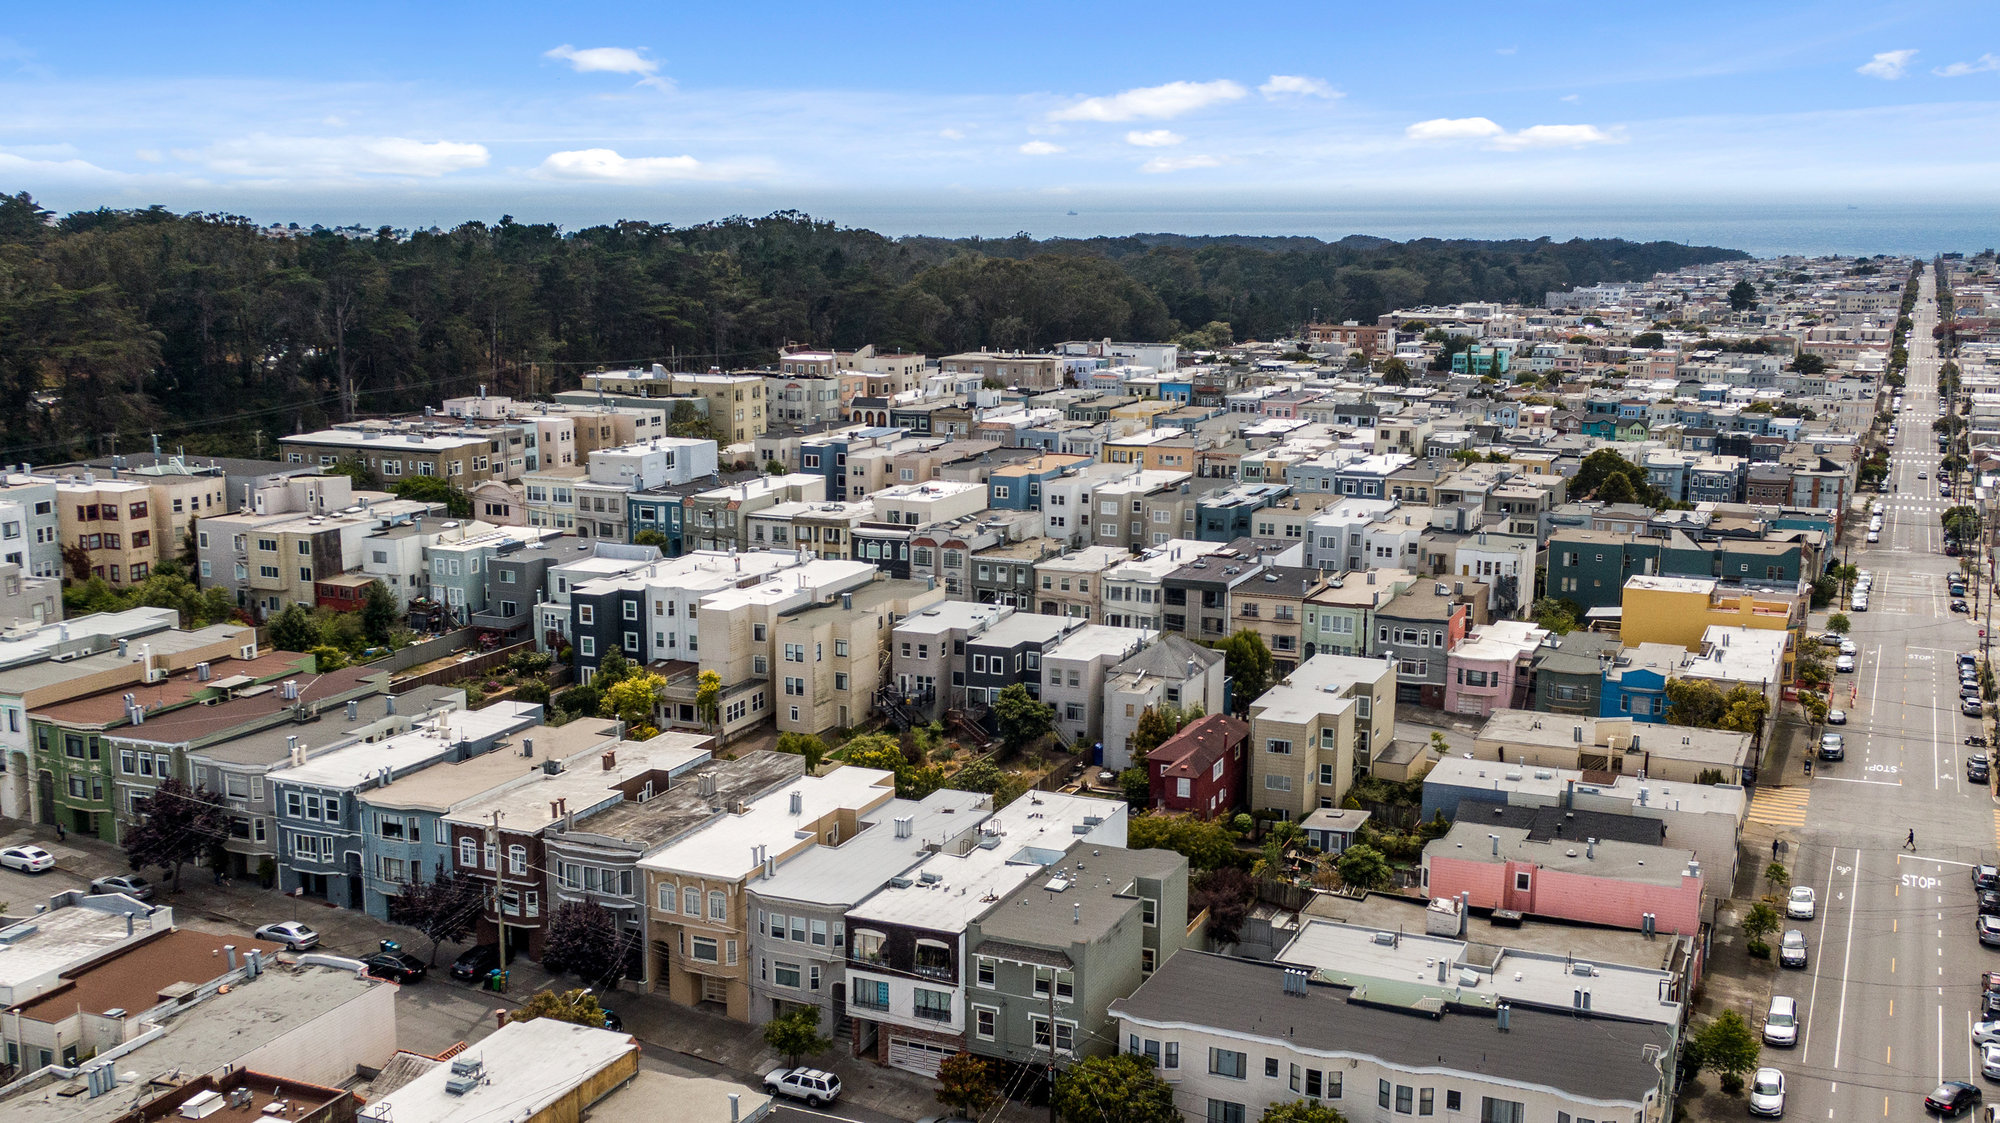 Property Photo: Aerial view of 719 18th Avenue, showing proximity to Ocean Beach and Golden Gate Park